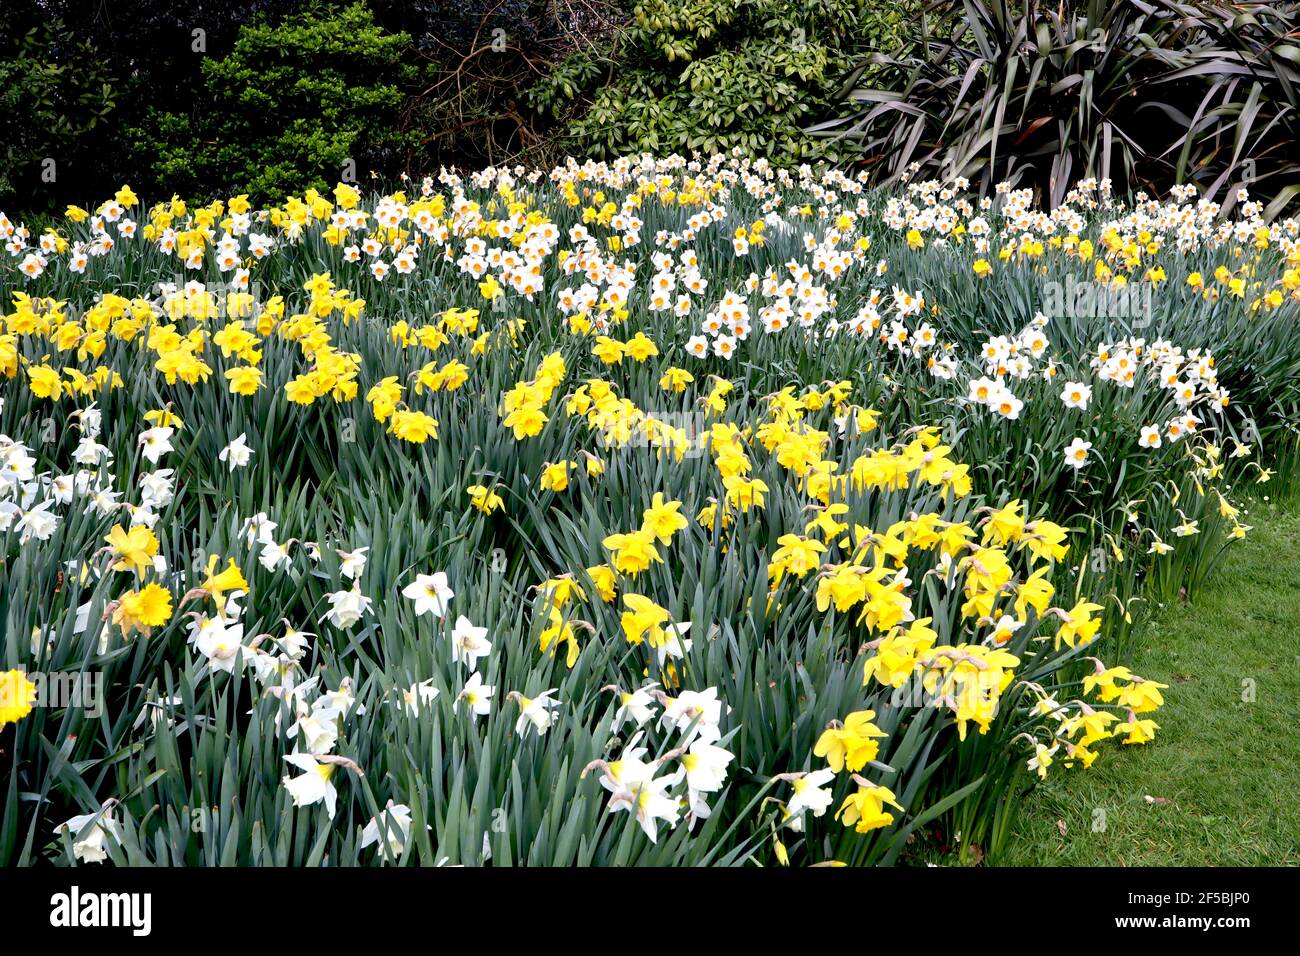 Narcissus / Daffodil ‘Barrett Browning’  Narcissus / Daffodil ‘Dutch Master’ Narcissus / Daffodil ‘Mount Hood’ March, England, UK Stock Photo